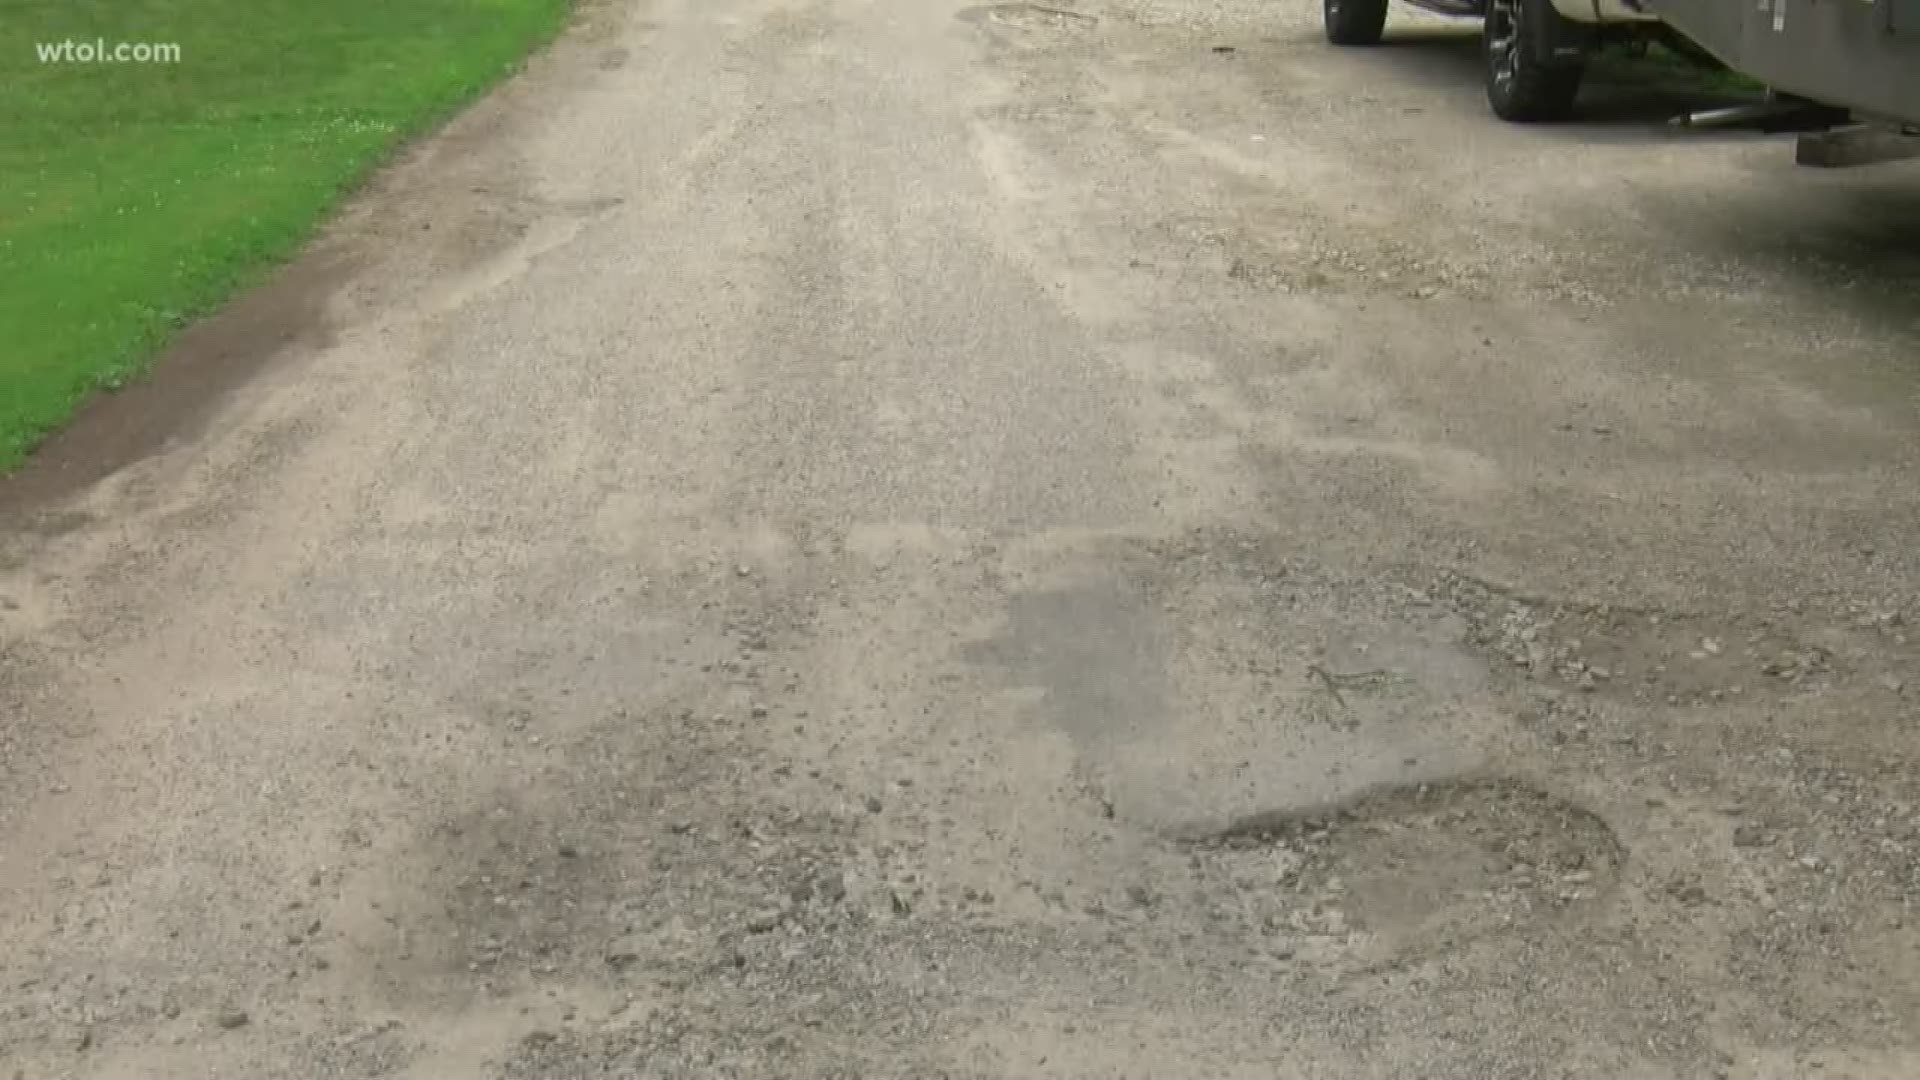 After Deigle Drive in west Toledo was marked as "completed" in pothole repairs despite plenty of craters remaining, WTOL stepped in and got action from the city.